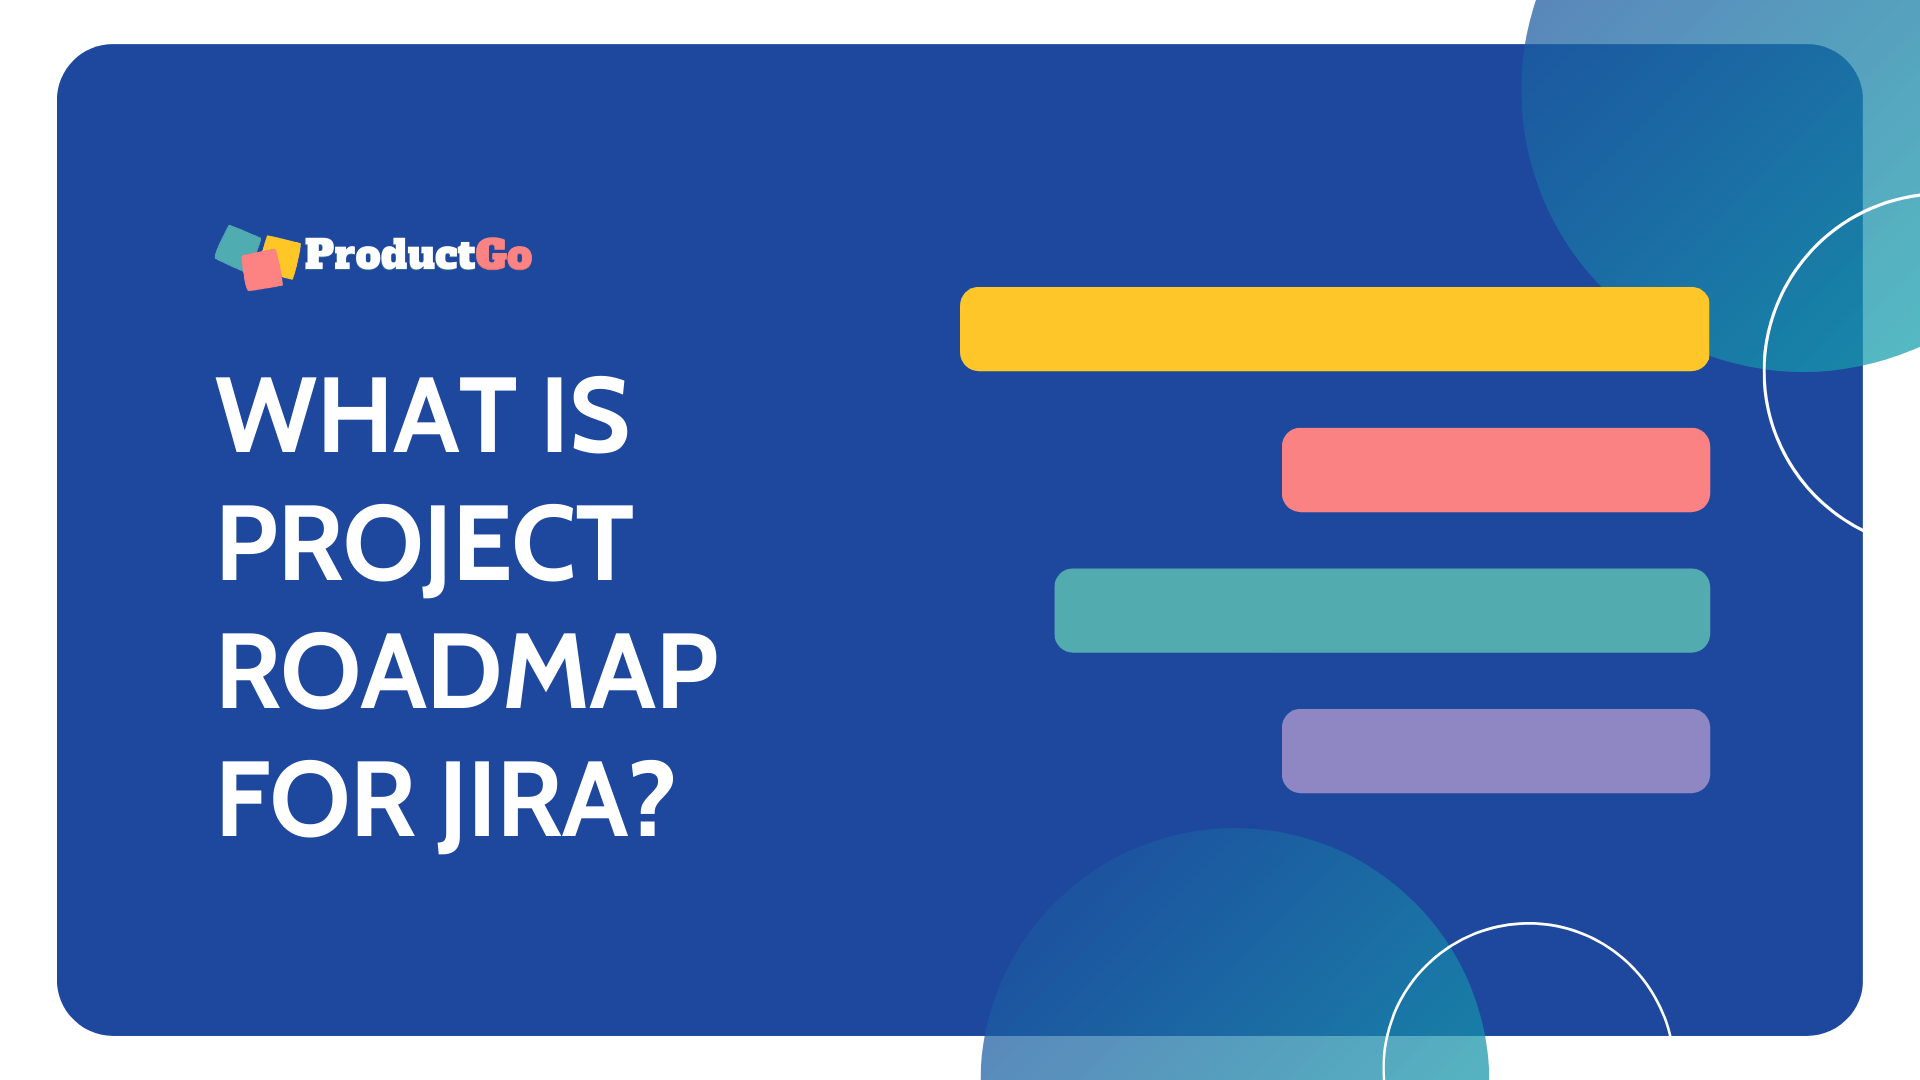 What is project roadmap